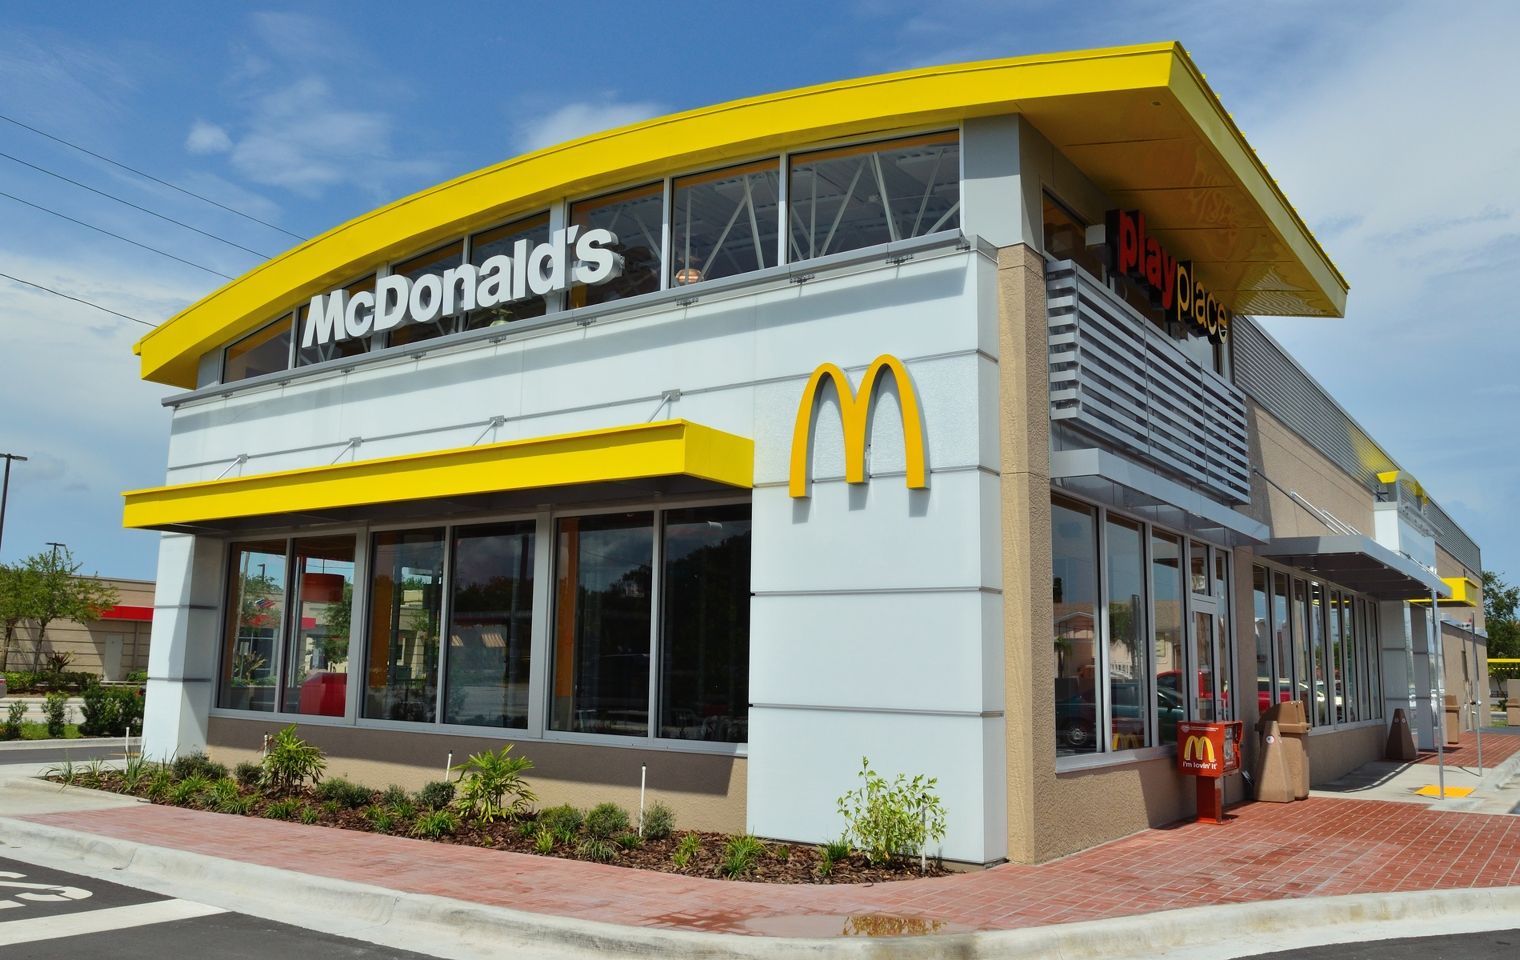 More DC McDonald’s getting kiosks, table service, curbside pickup